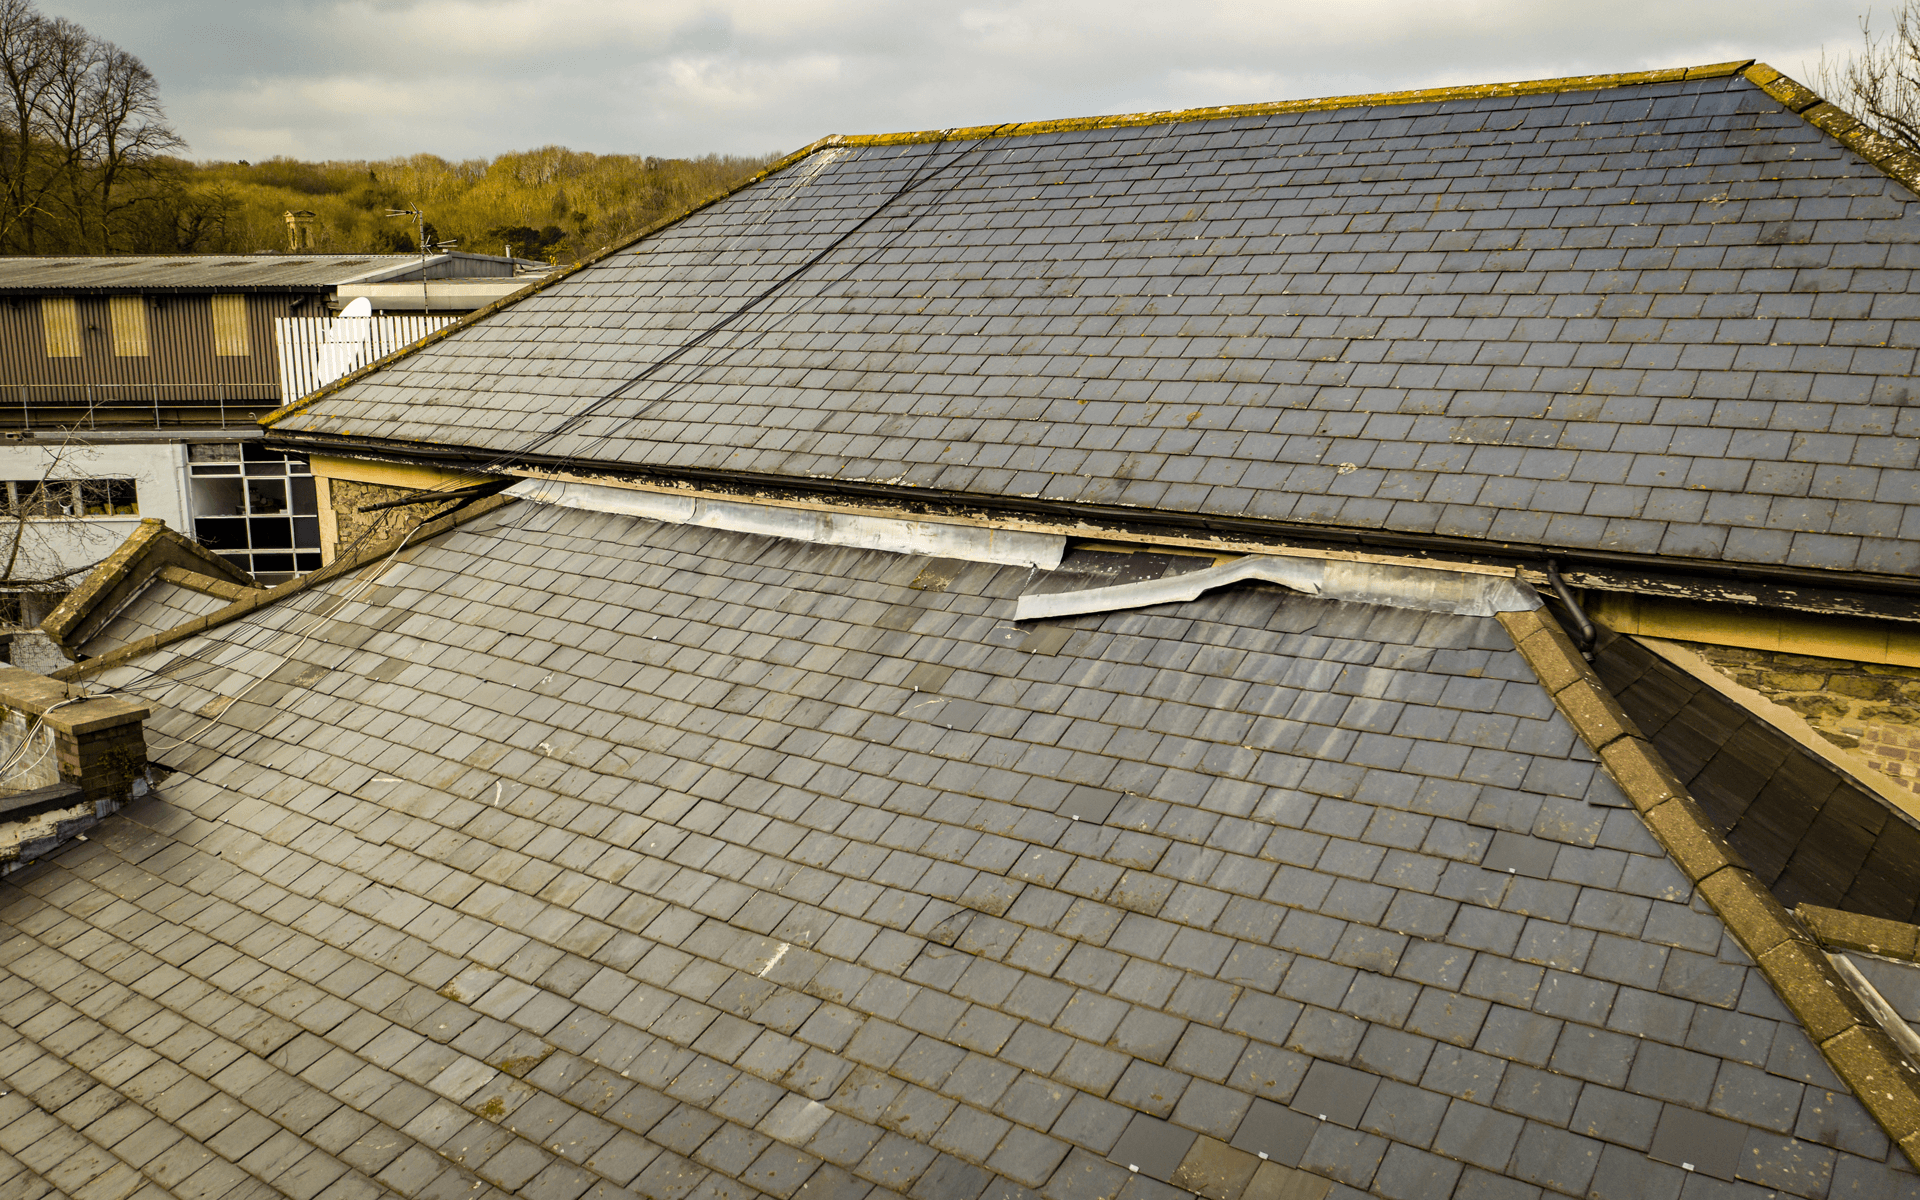 "Mavic 2 Pro" aerial drone photo for a roof survey at "Arnos Manor Hotel" showing damage to the roof